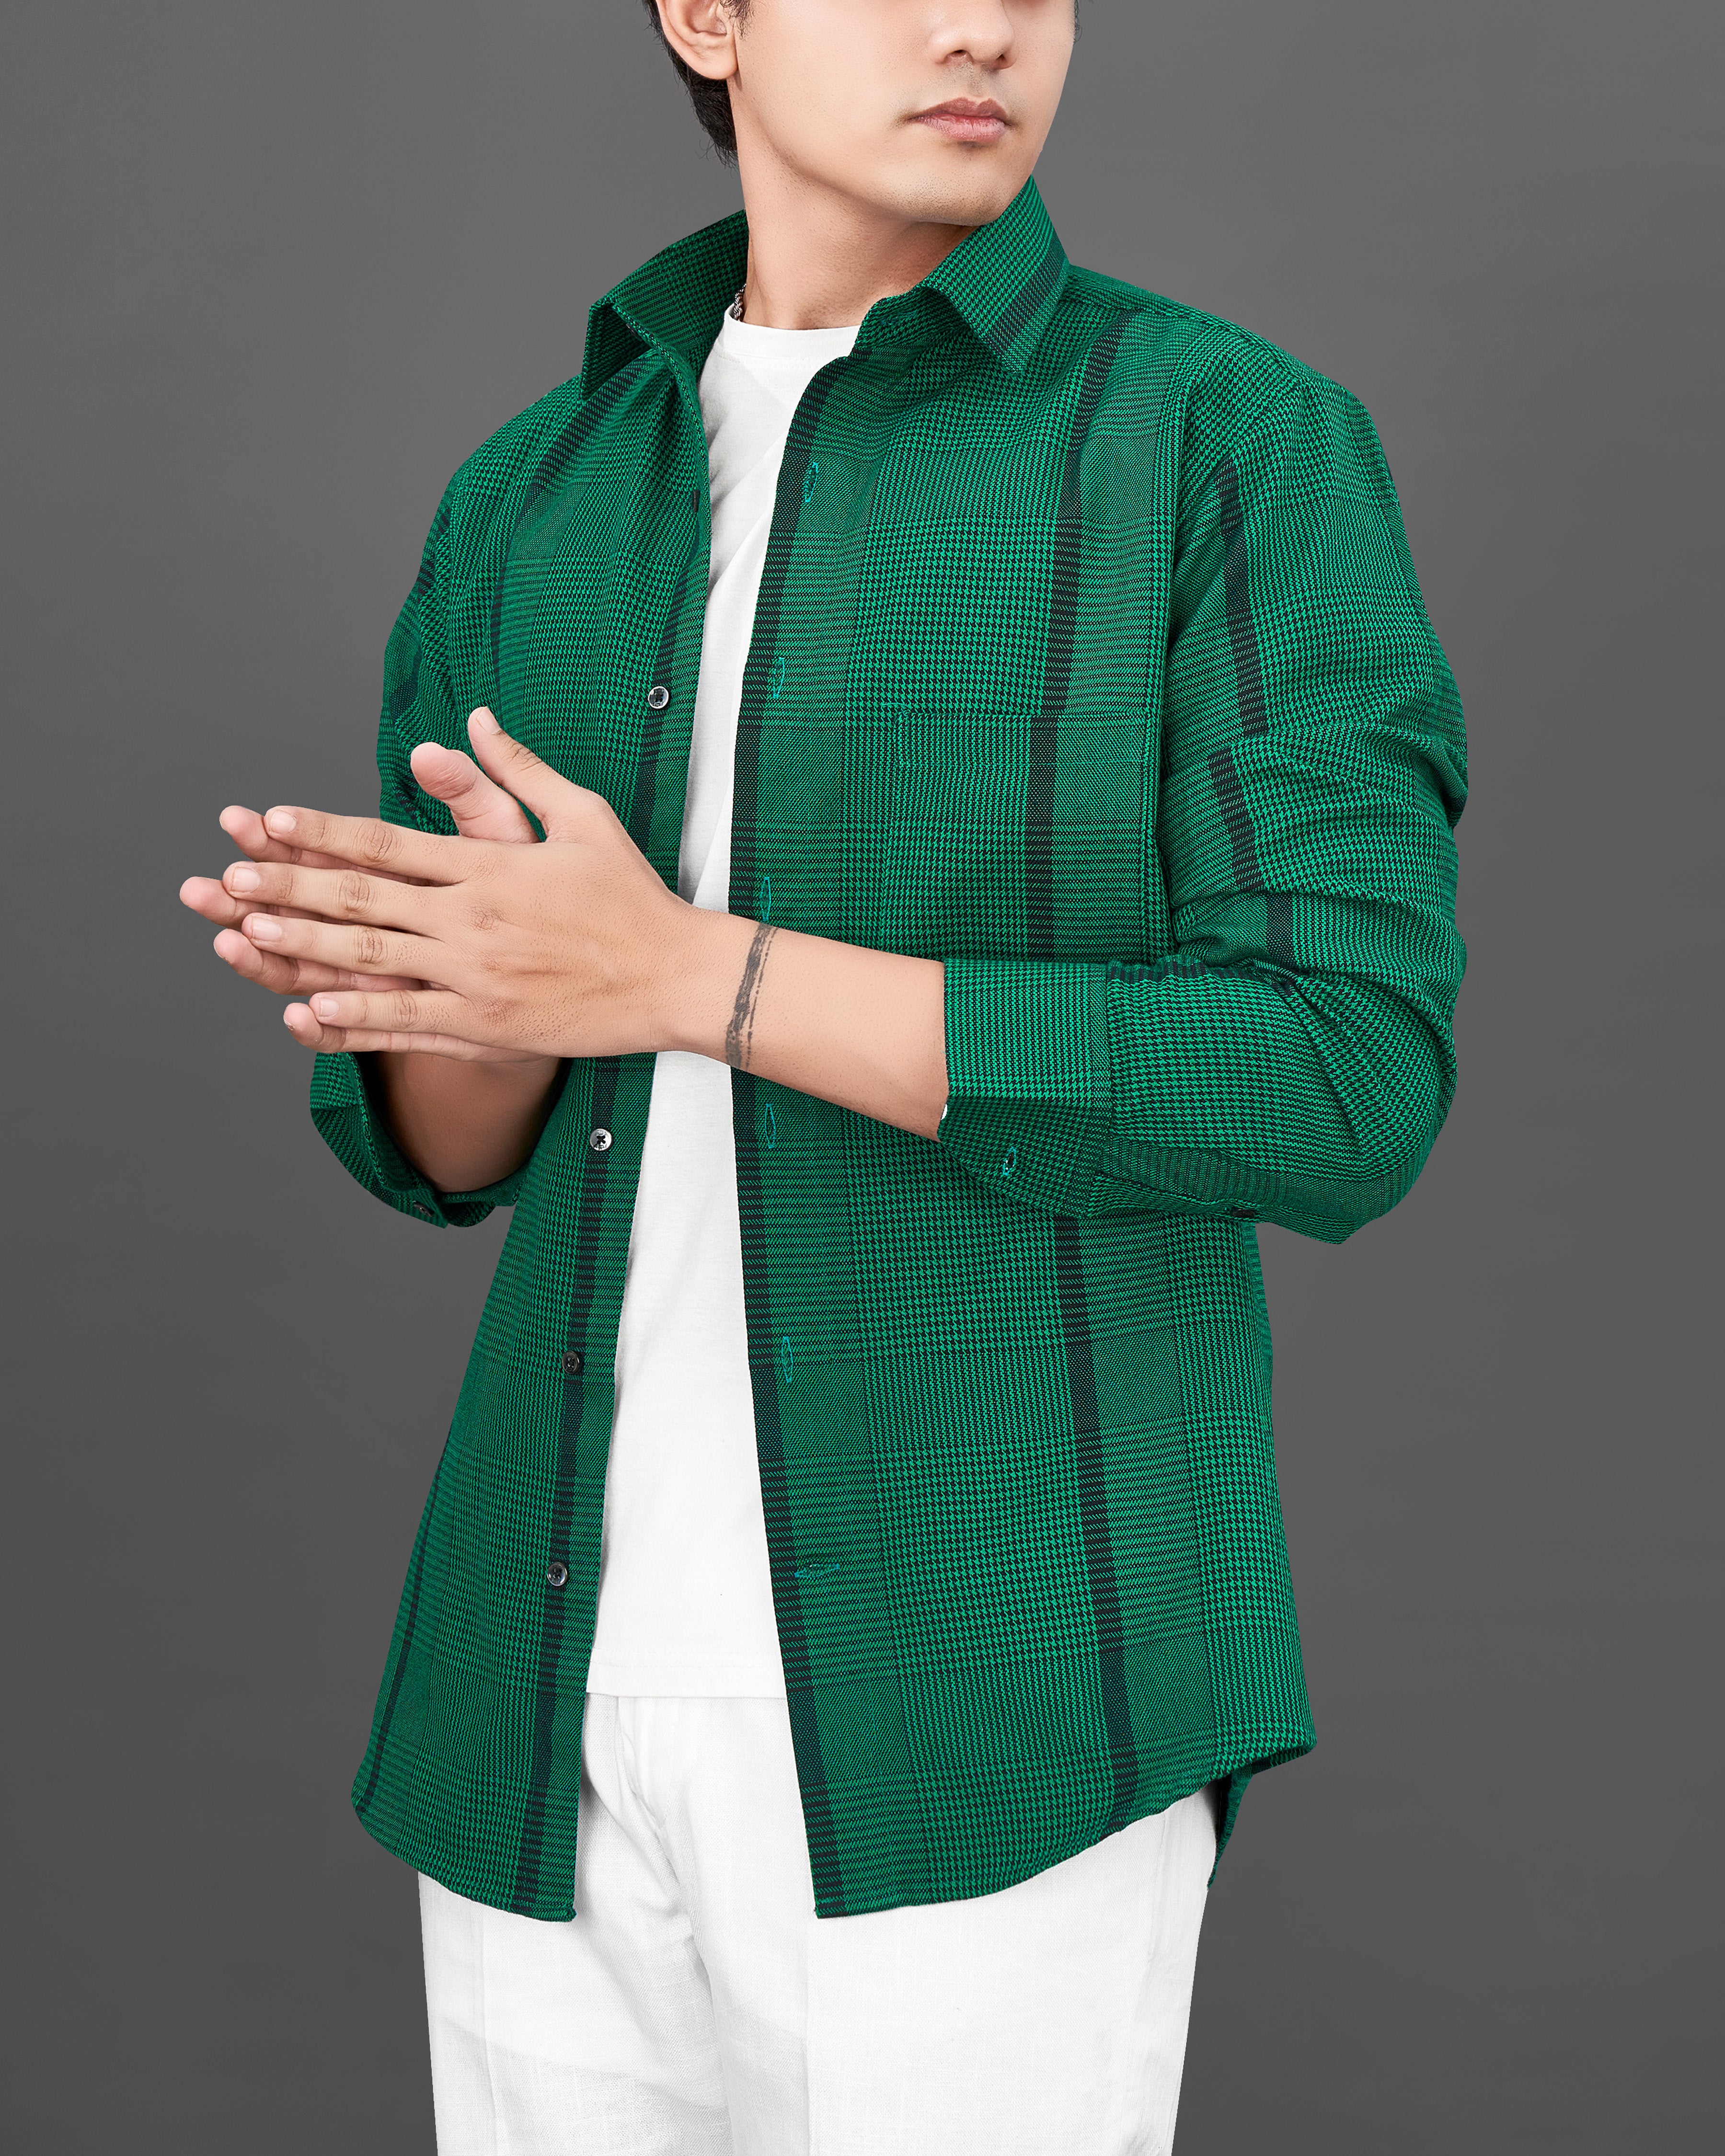 Spruce Green with Black Houndstooth Textured Overshirt/Shacket